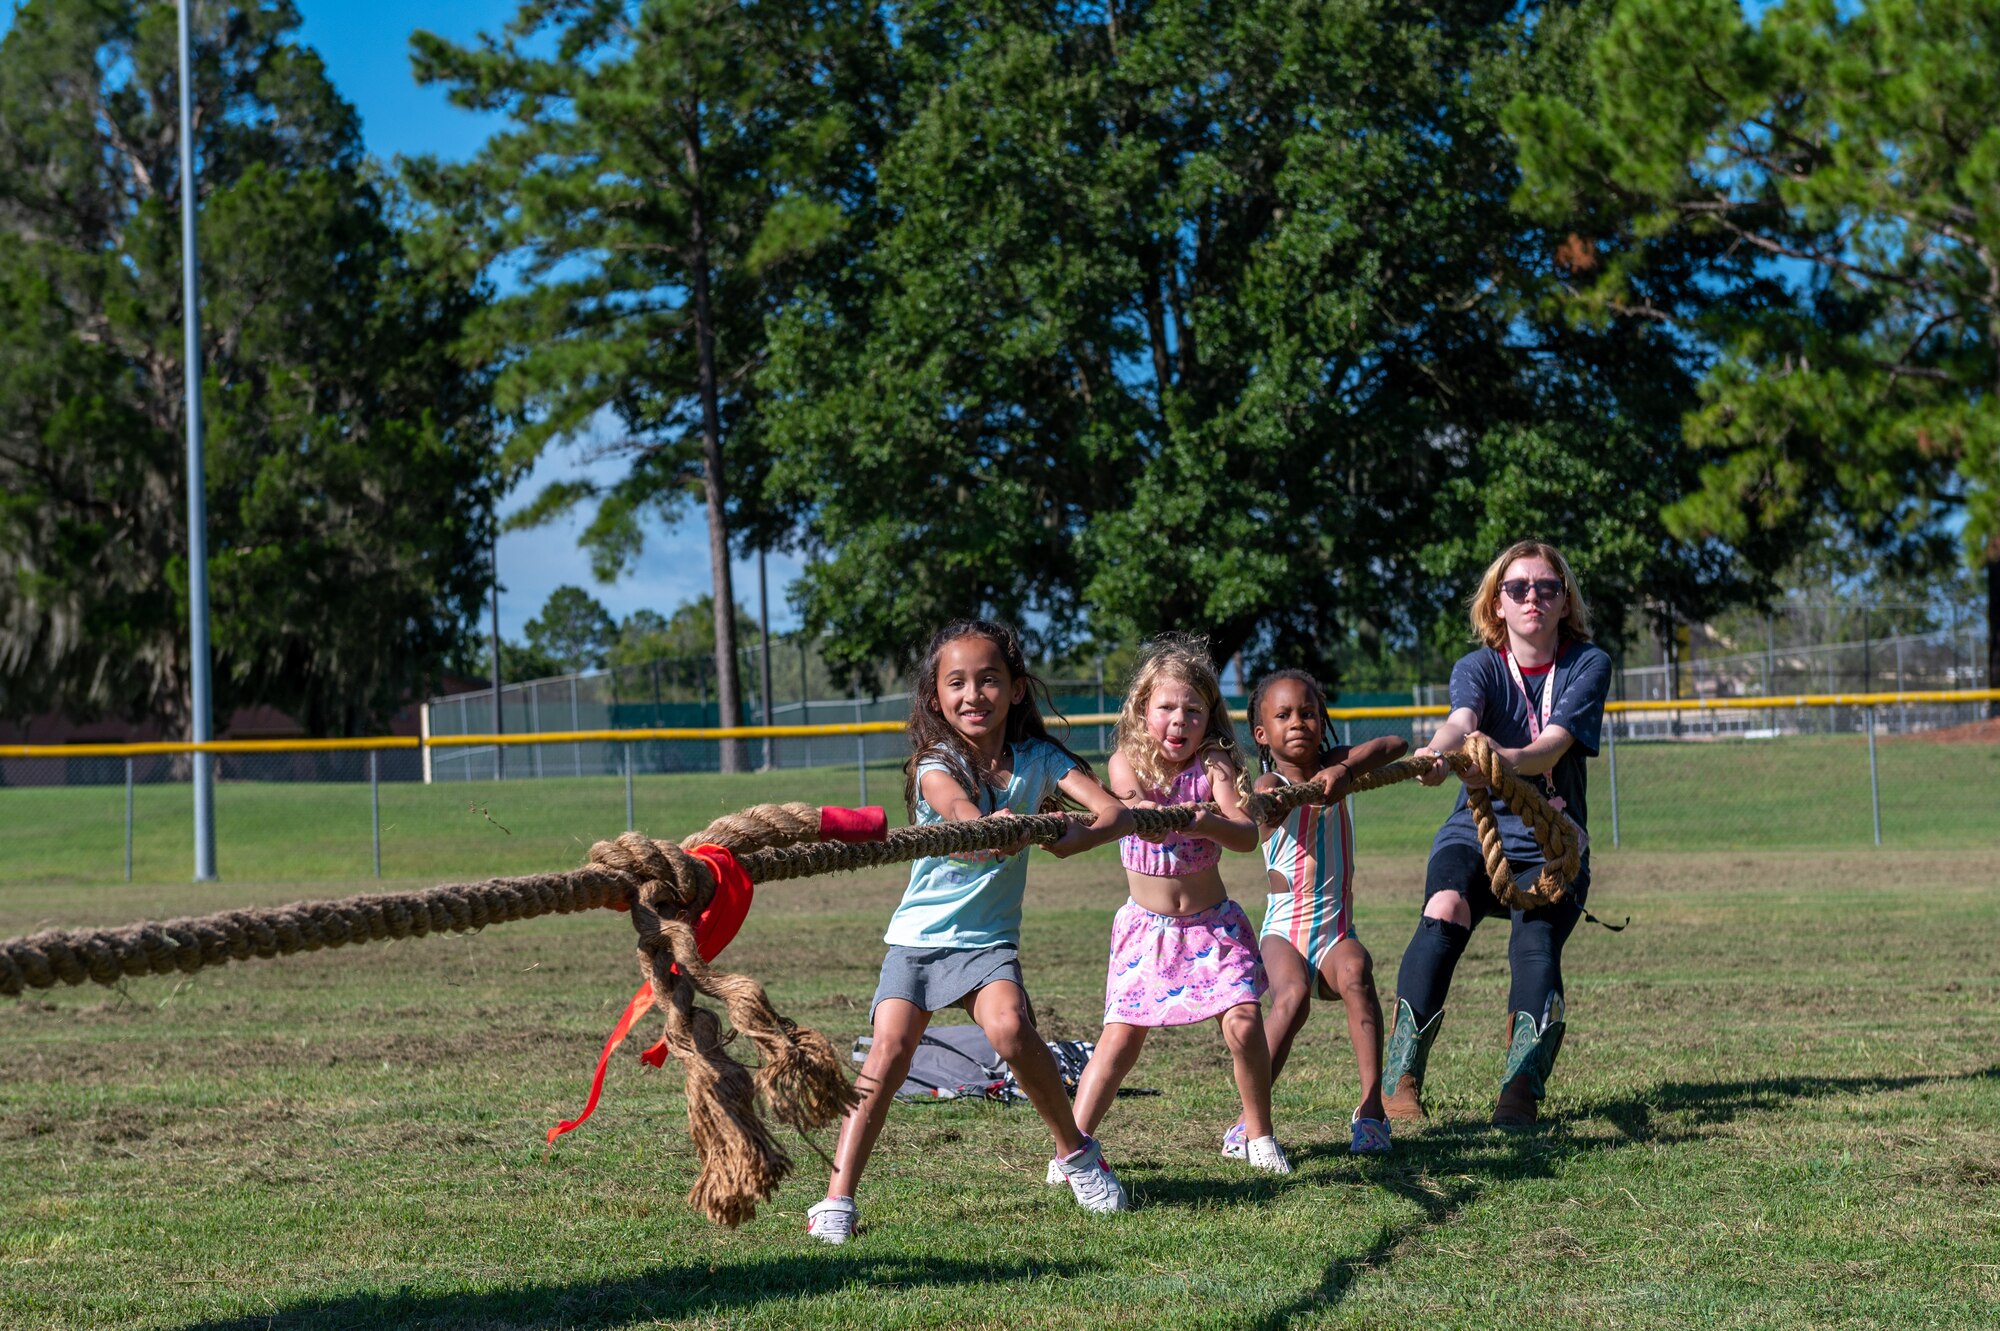 Children pull on a rope during a game of tug-o-war during a Back to School Field Day.